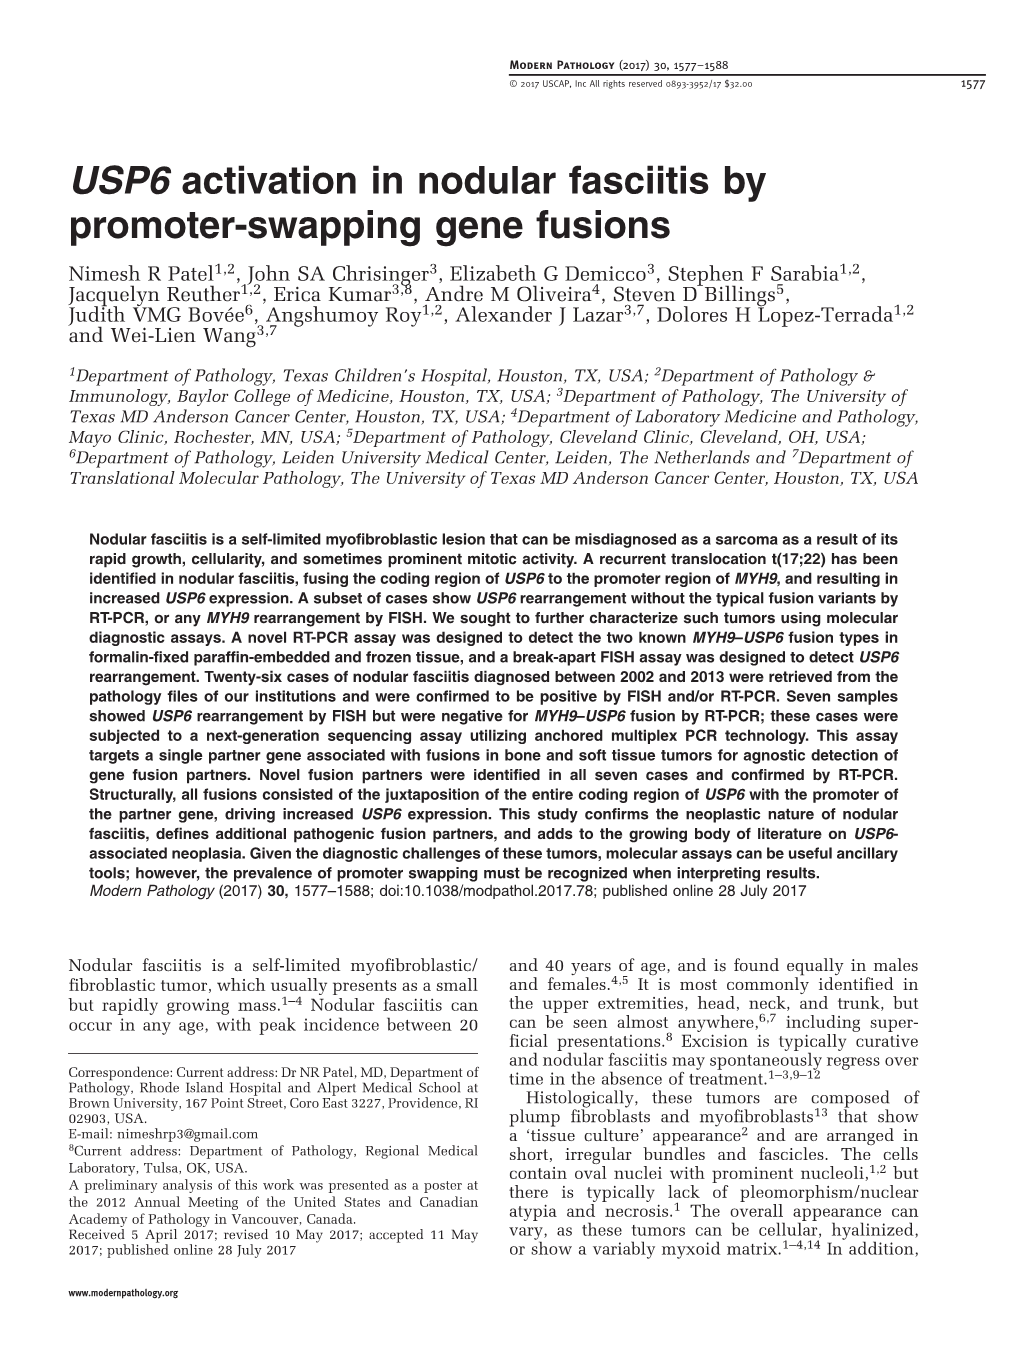 USP6 Activation in Nodular Fasciitis by Promoter-Swapping Gene Fusions